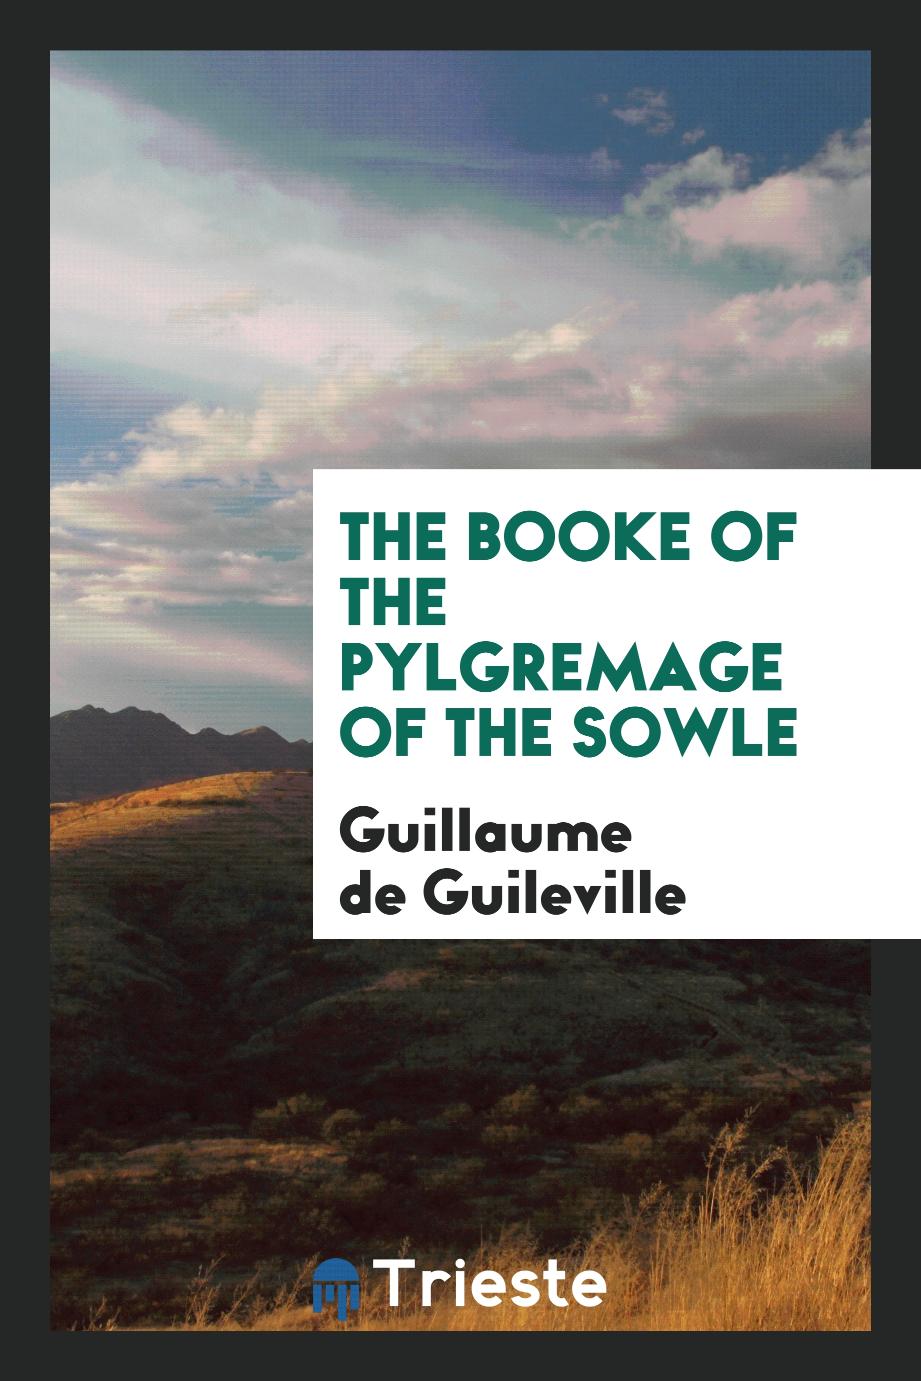 The Booke of the Pylgremage of the Sowle